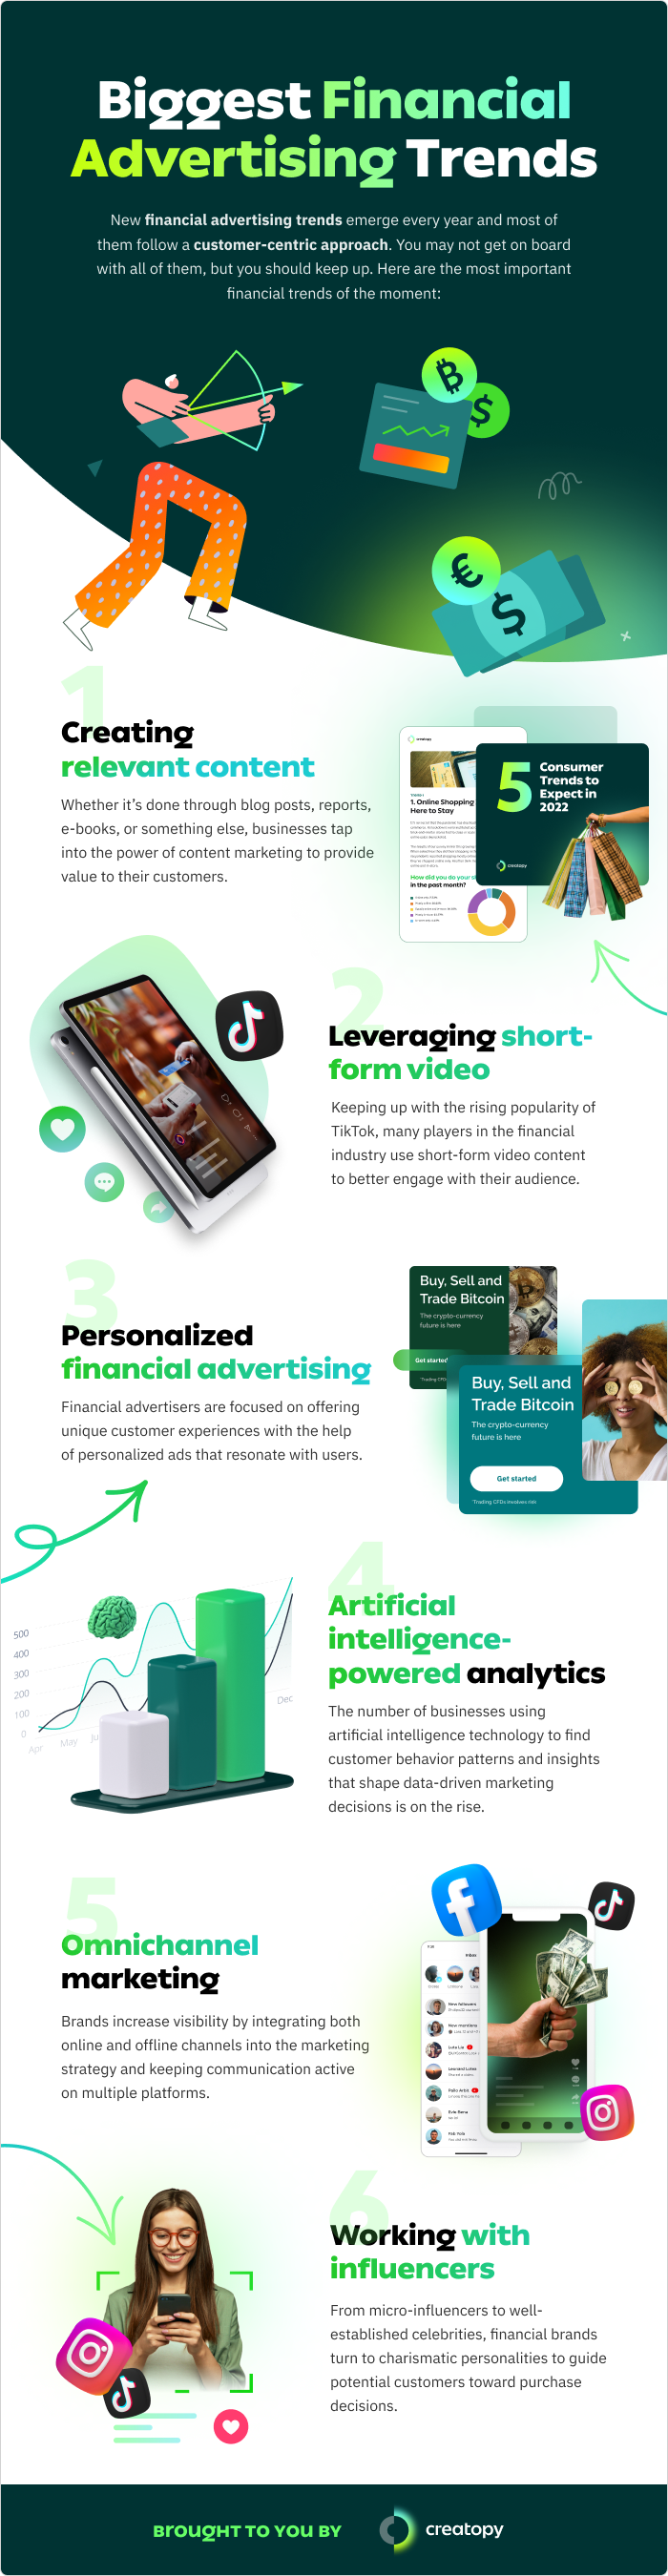 Financial advertising trends infographic